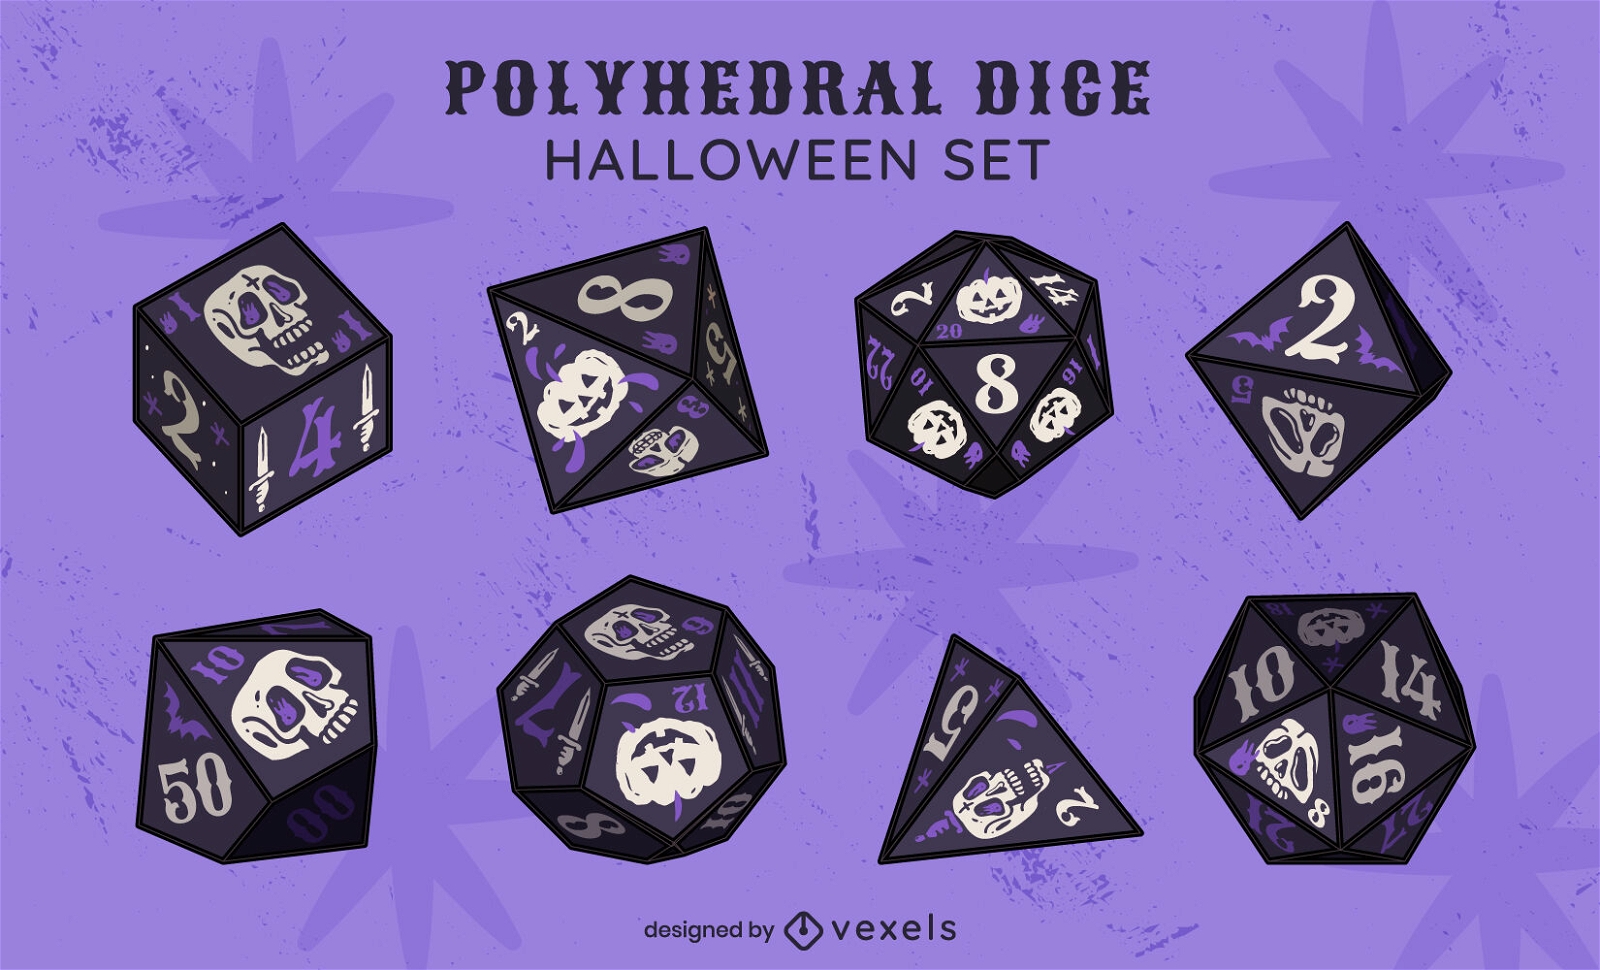 Halloween themed D20 polyhedral dice set